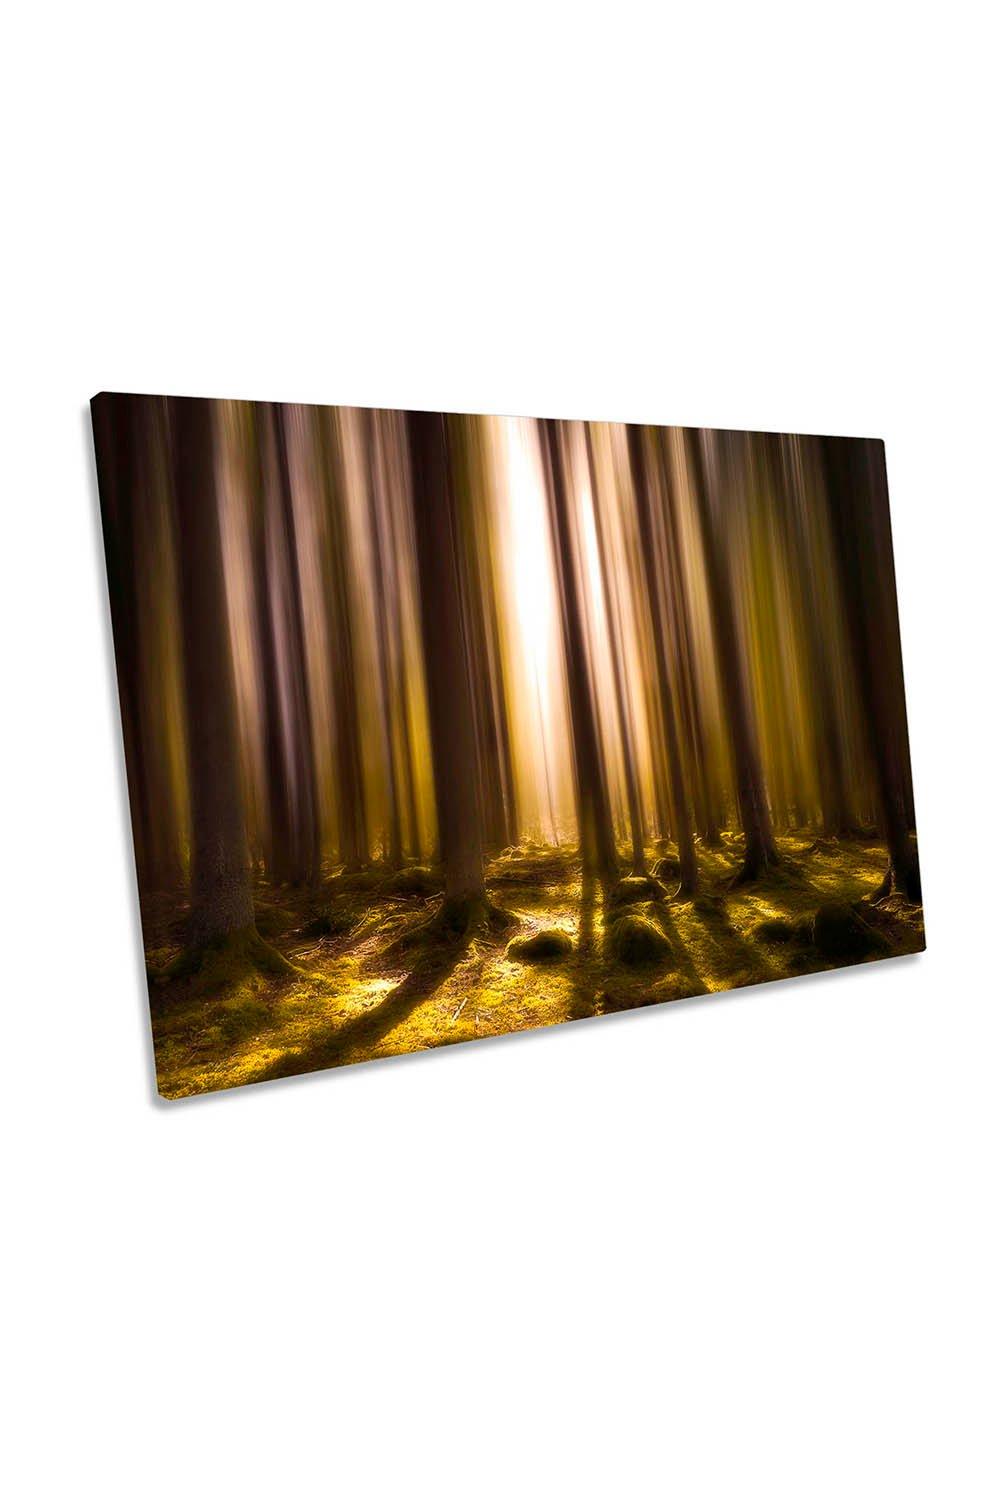 Breathe of Life Mysterious Forest Canvas Wall Art Picture Print